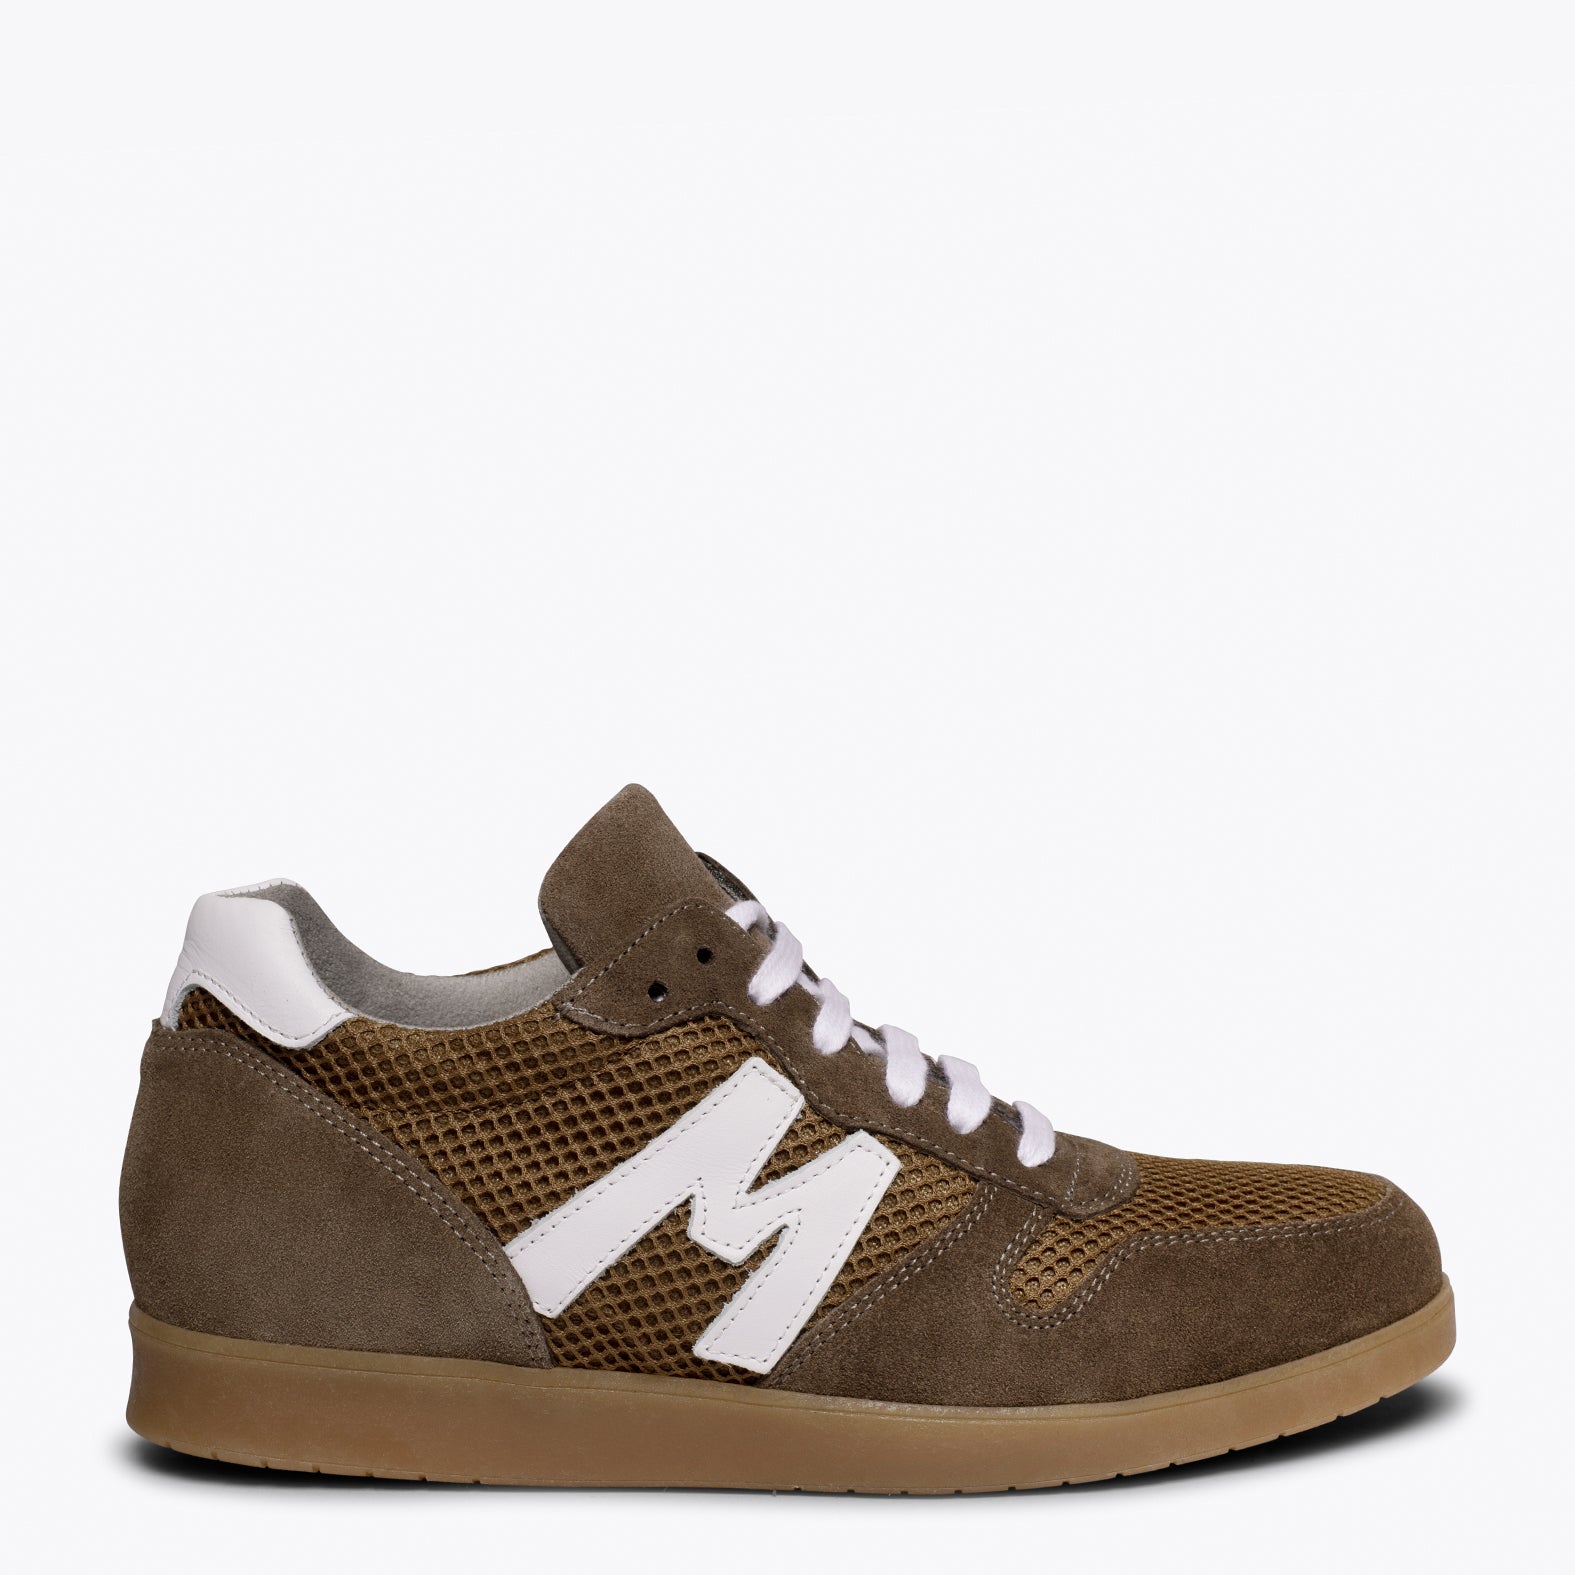 MOVE – TAUPE leather sneaker